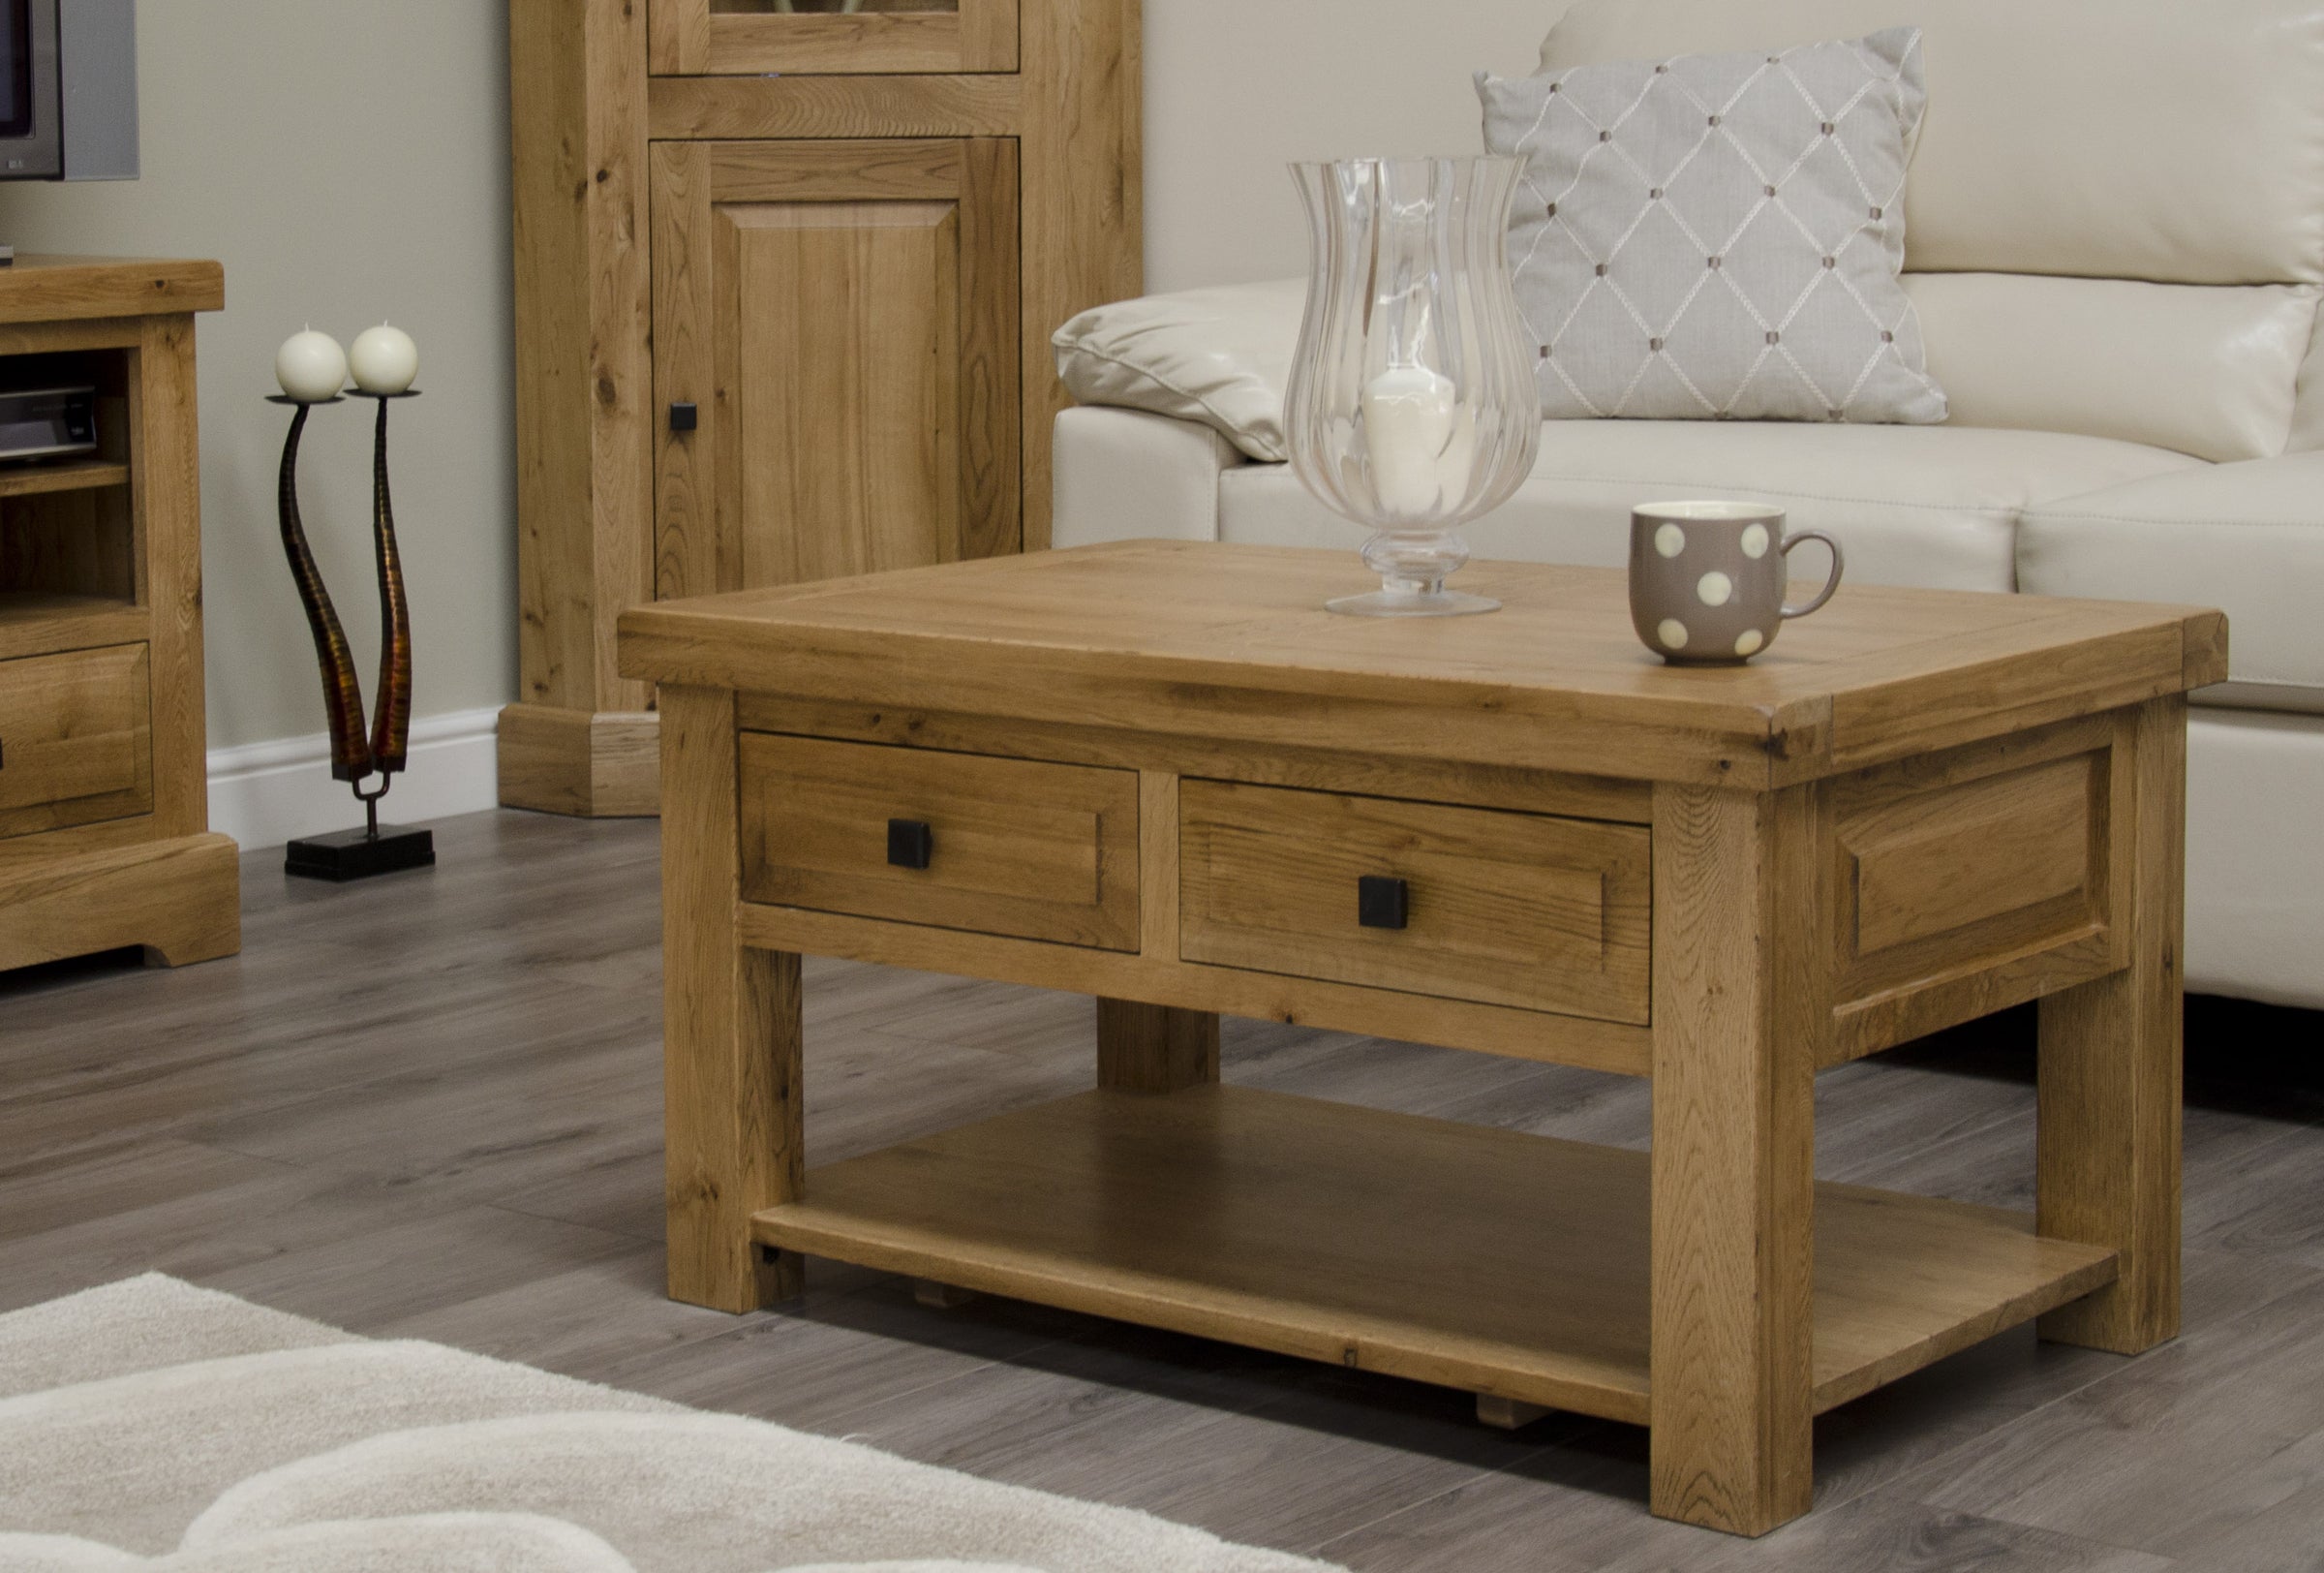 Eton solid oak furniture from Top Secret Furniture Outlet, Holmes Chapel, Cheshire